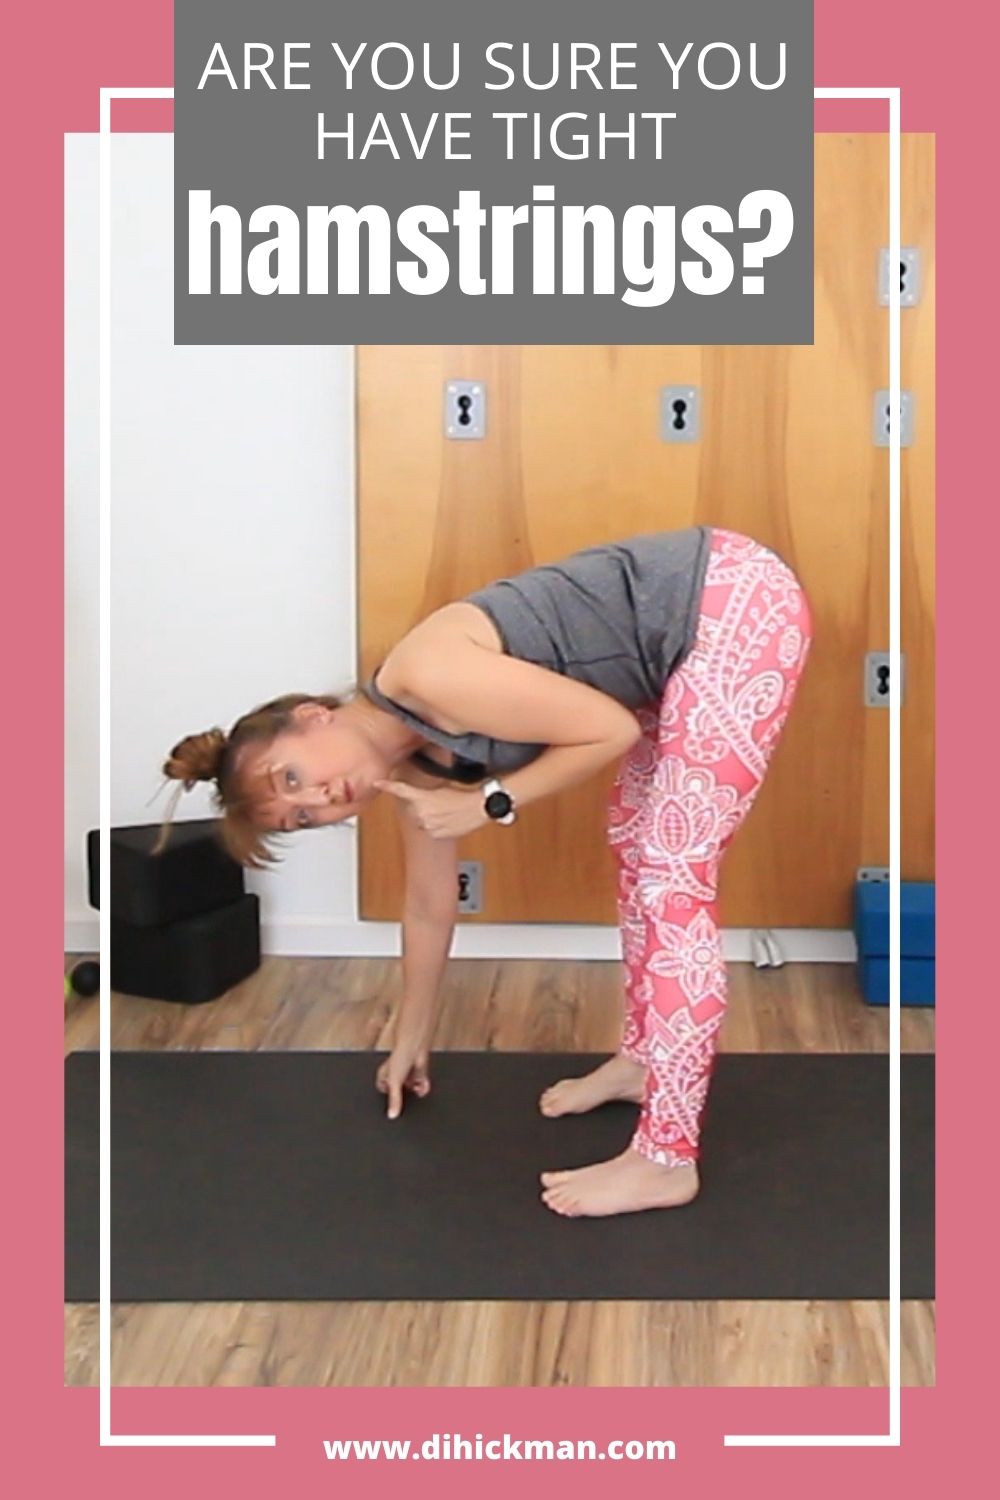 are you sure you have tight hamstrings?